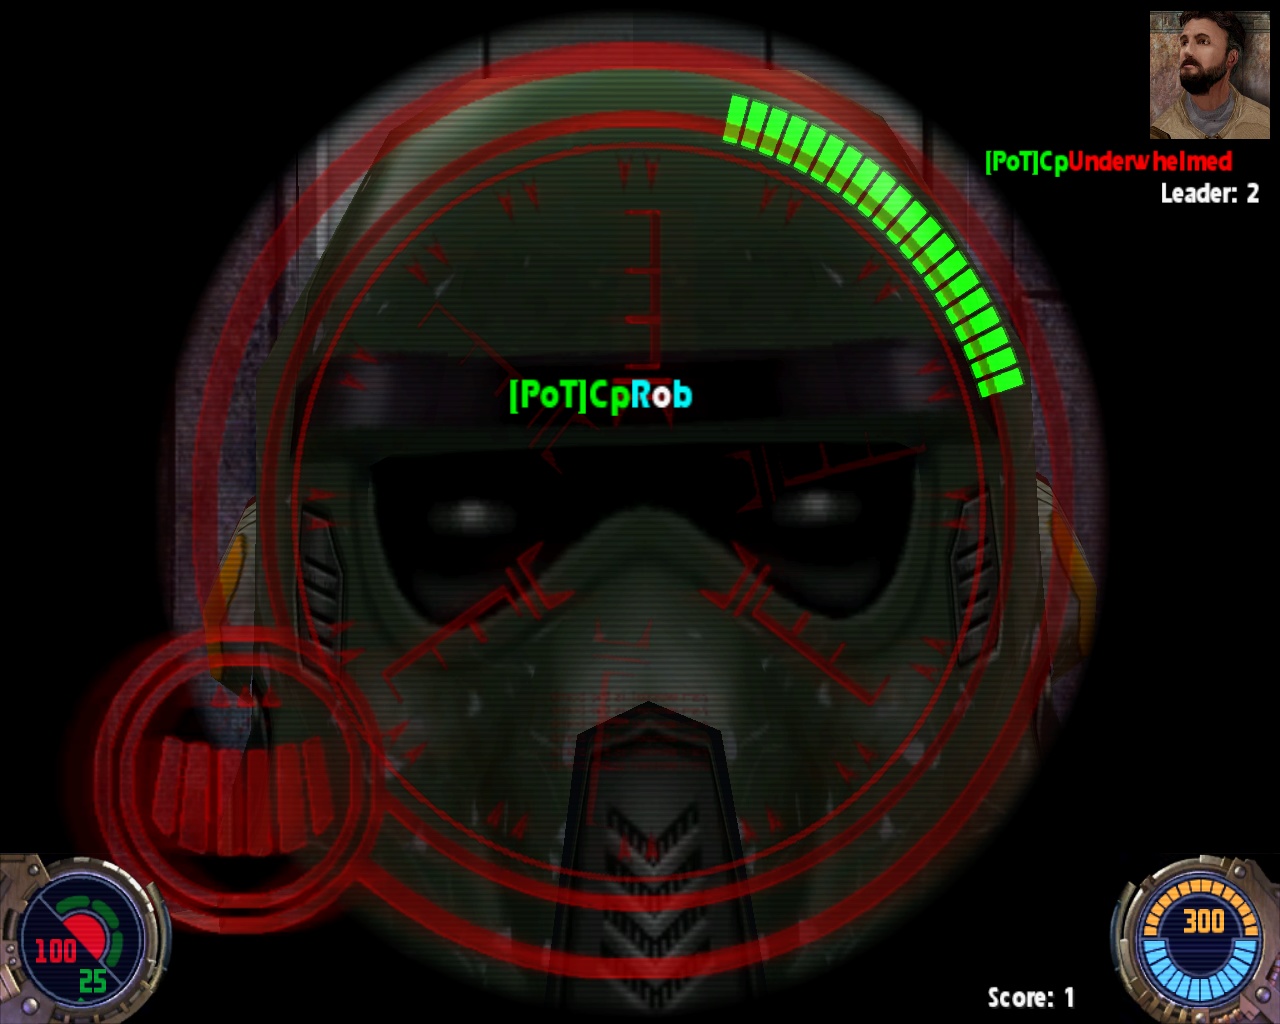 Looking downscope of a sniper rifle in Jedi Outcast 2 zoomed in hilariously right on a friend's avatar's face.